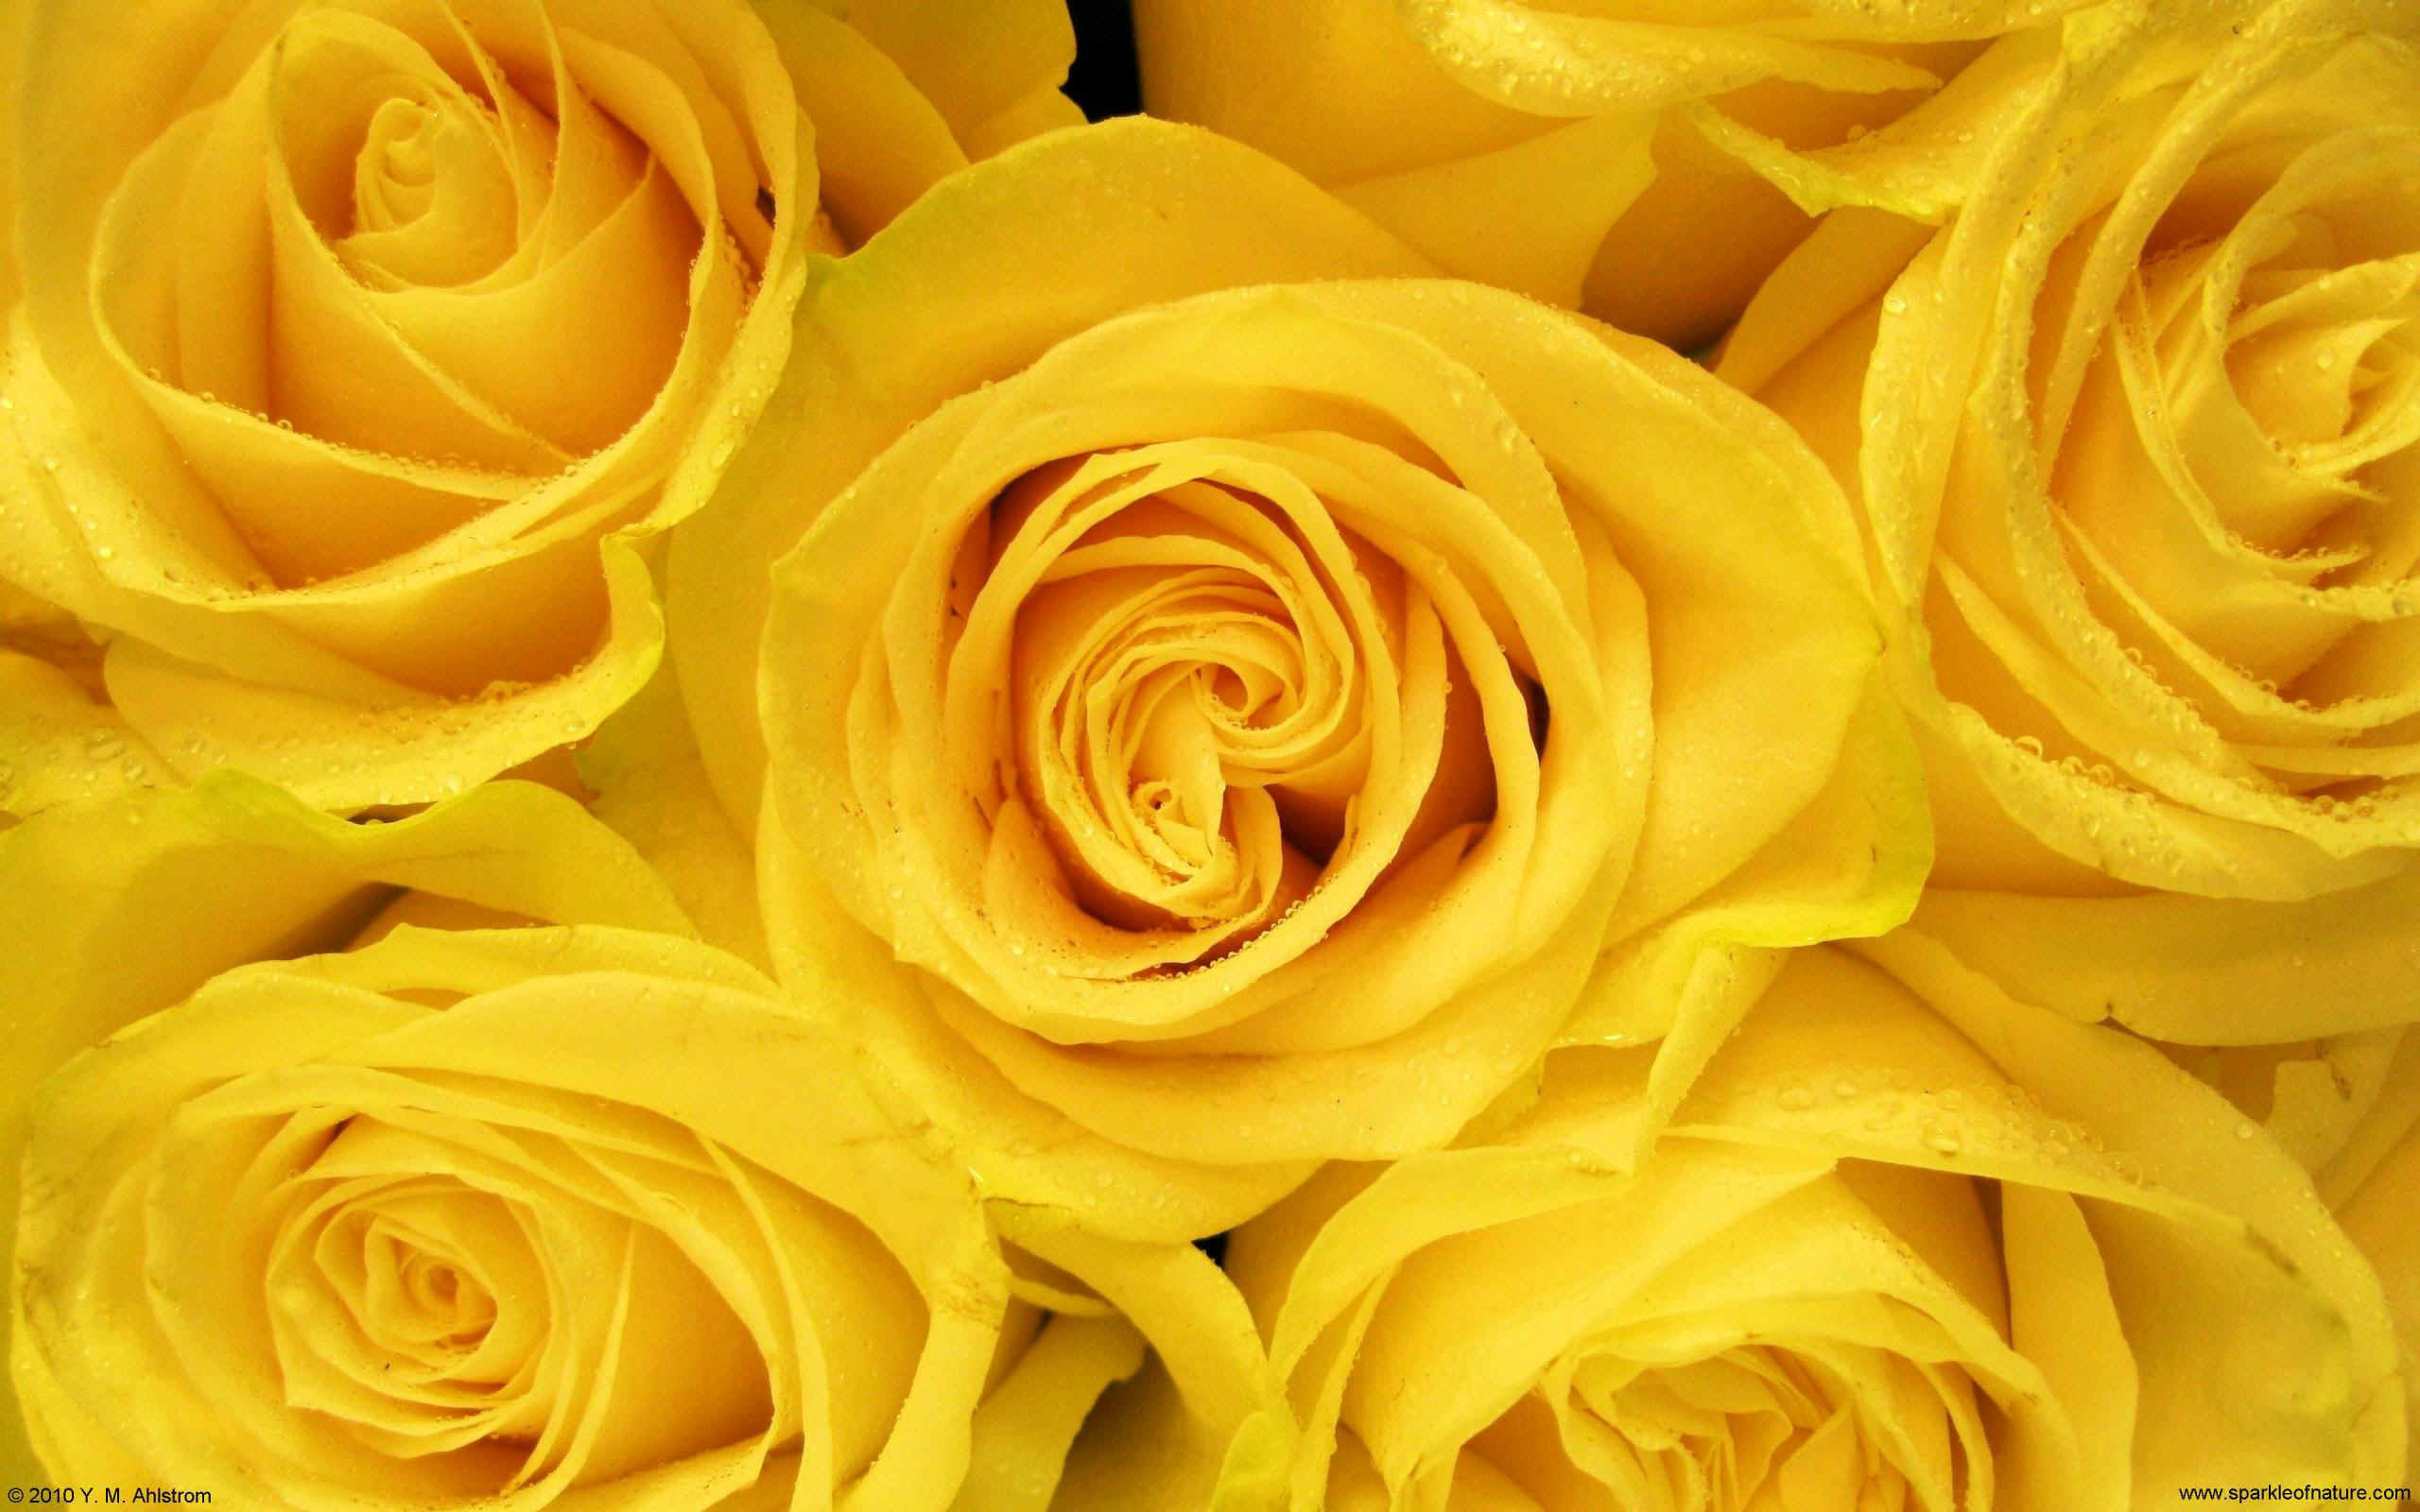 2560x1600  Yellow Roses Background Wallpaper Â· 0 Â· Download Â· Res: 1920x1080  ...